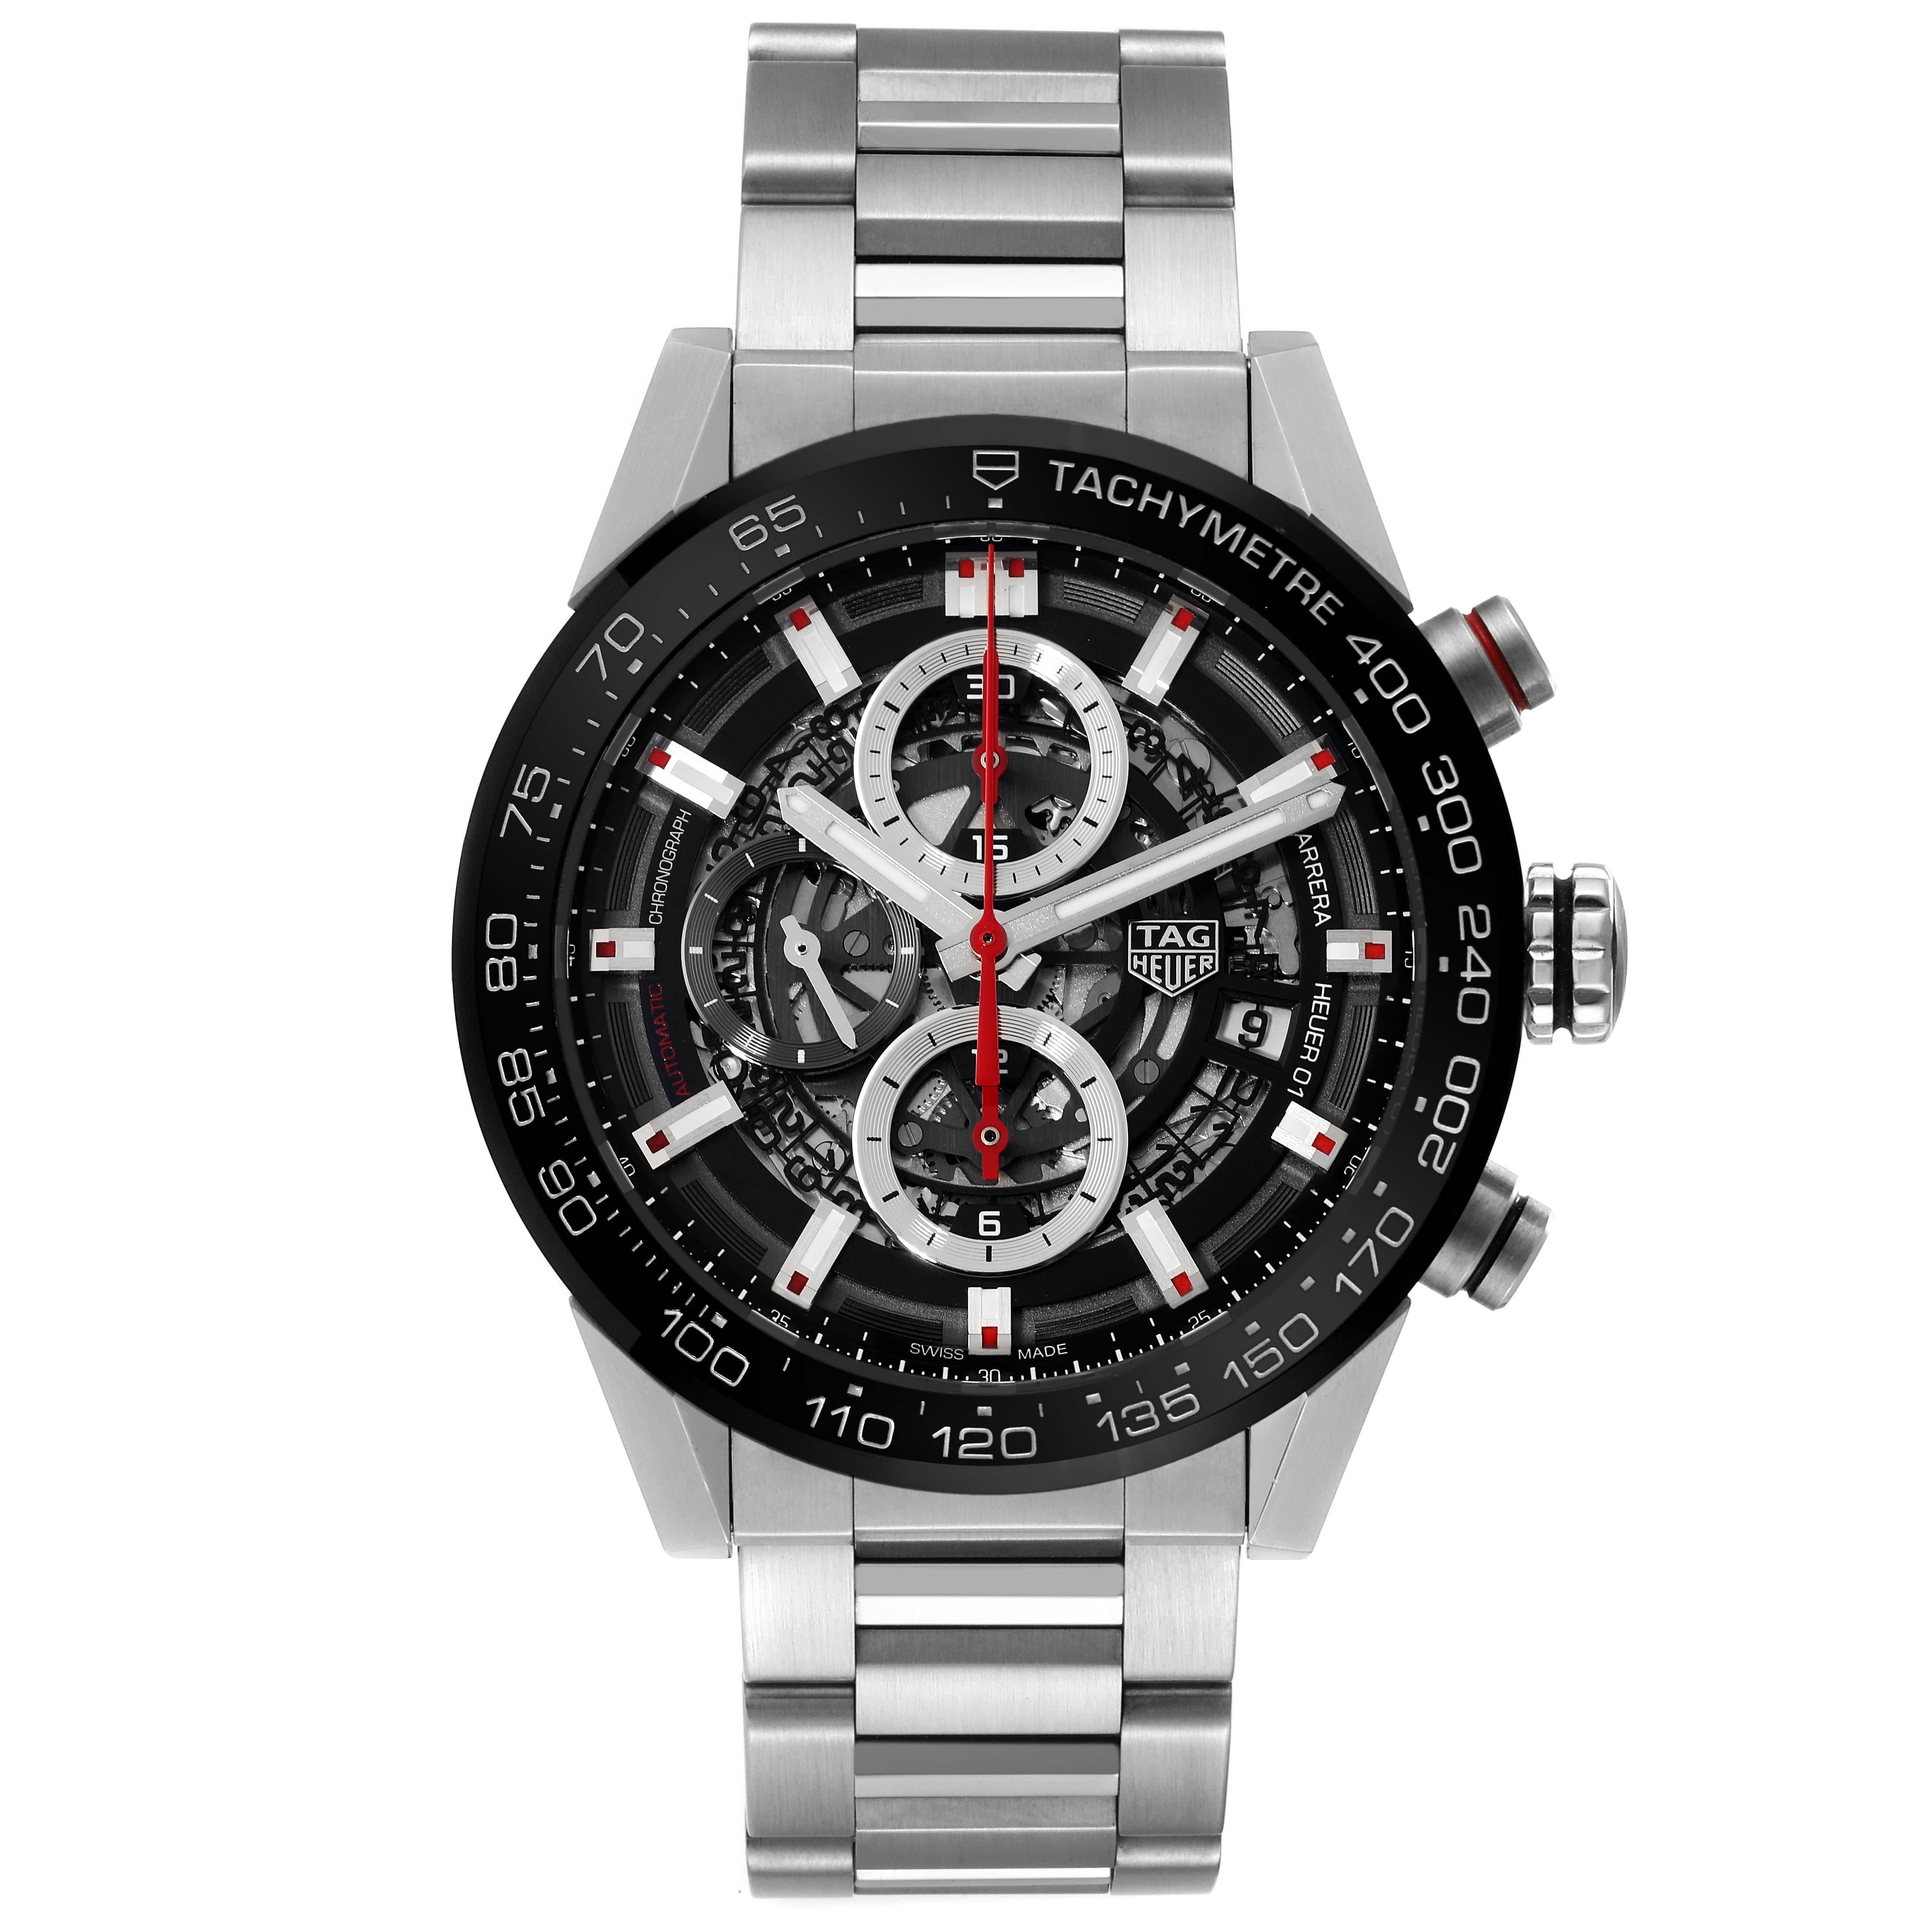 TAG Heuer Carrera Skeleton Dial Steel Mens Watch CAR201V Box Card. Automatic self-winding movement. Stainless steel case 43 mm. Case thickness: 16.5 mm. Exhibition transparent sapphire crystal caseback. Black ceramic bezel with tachymeter scale.